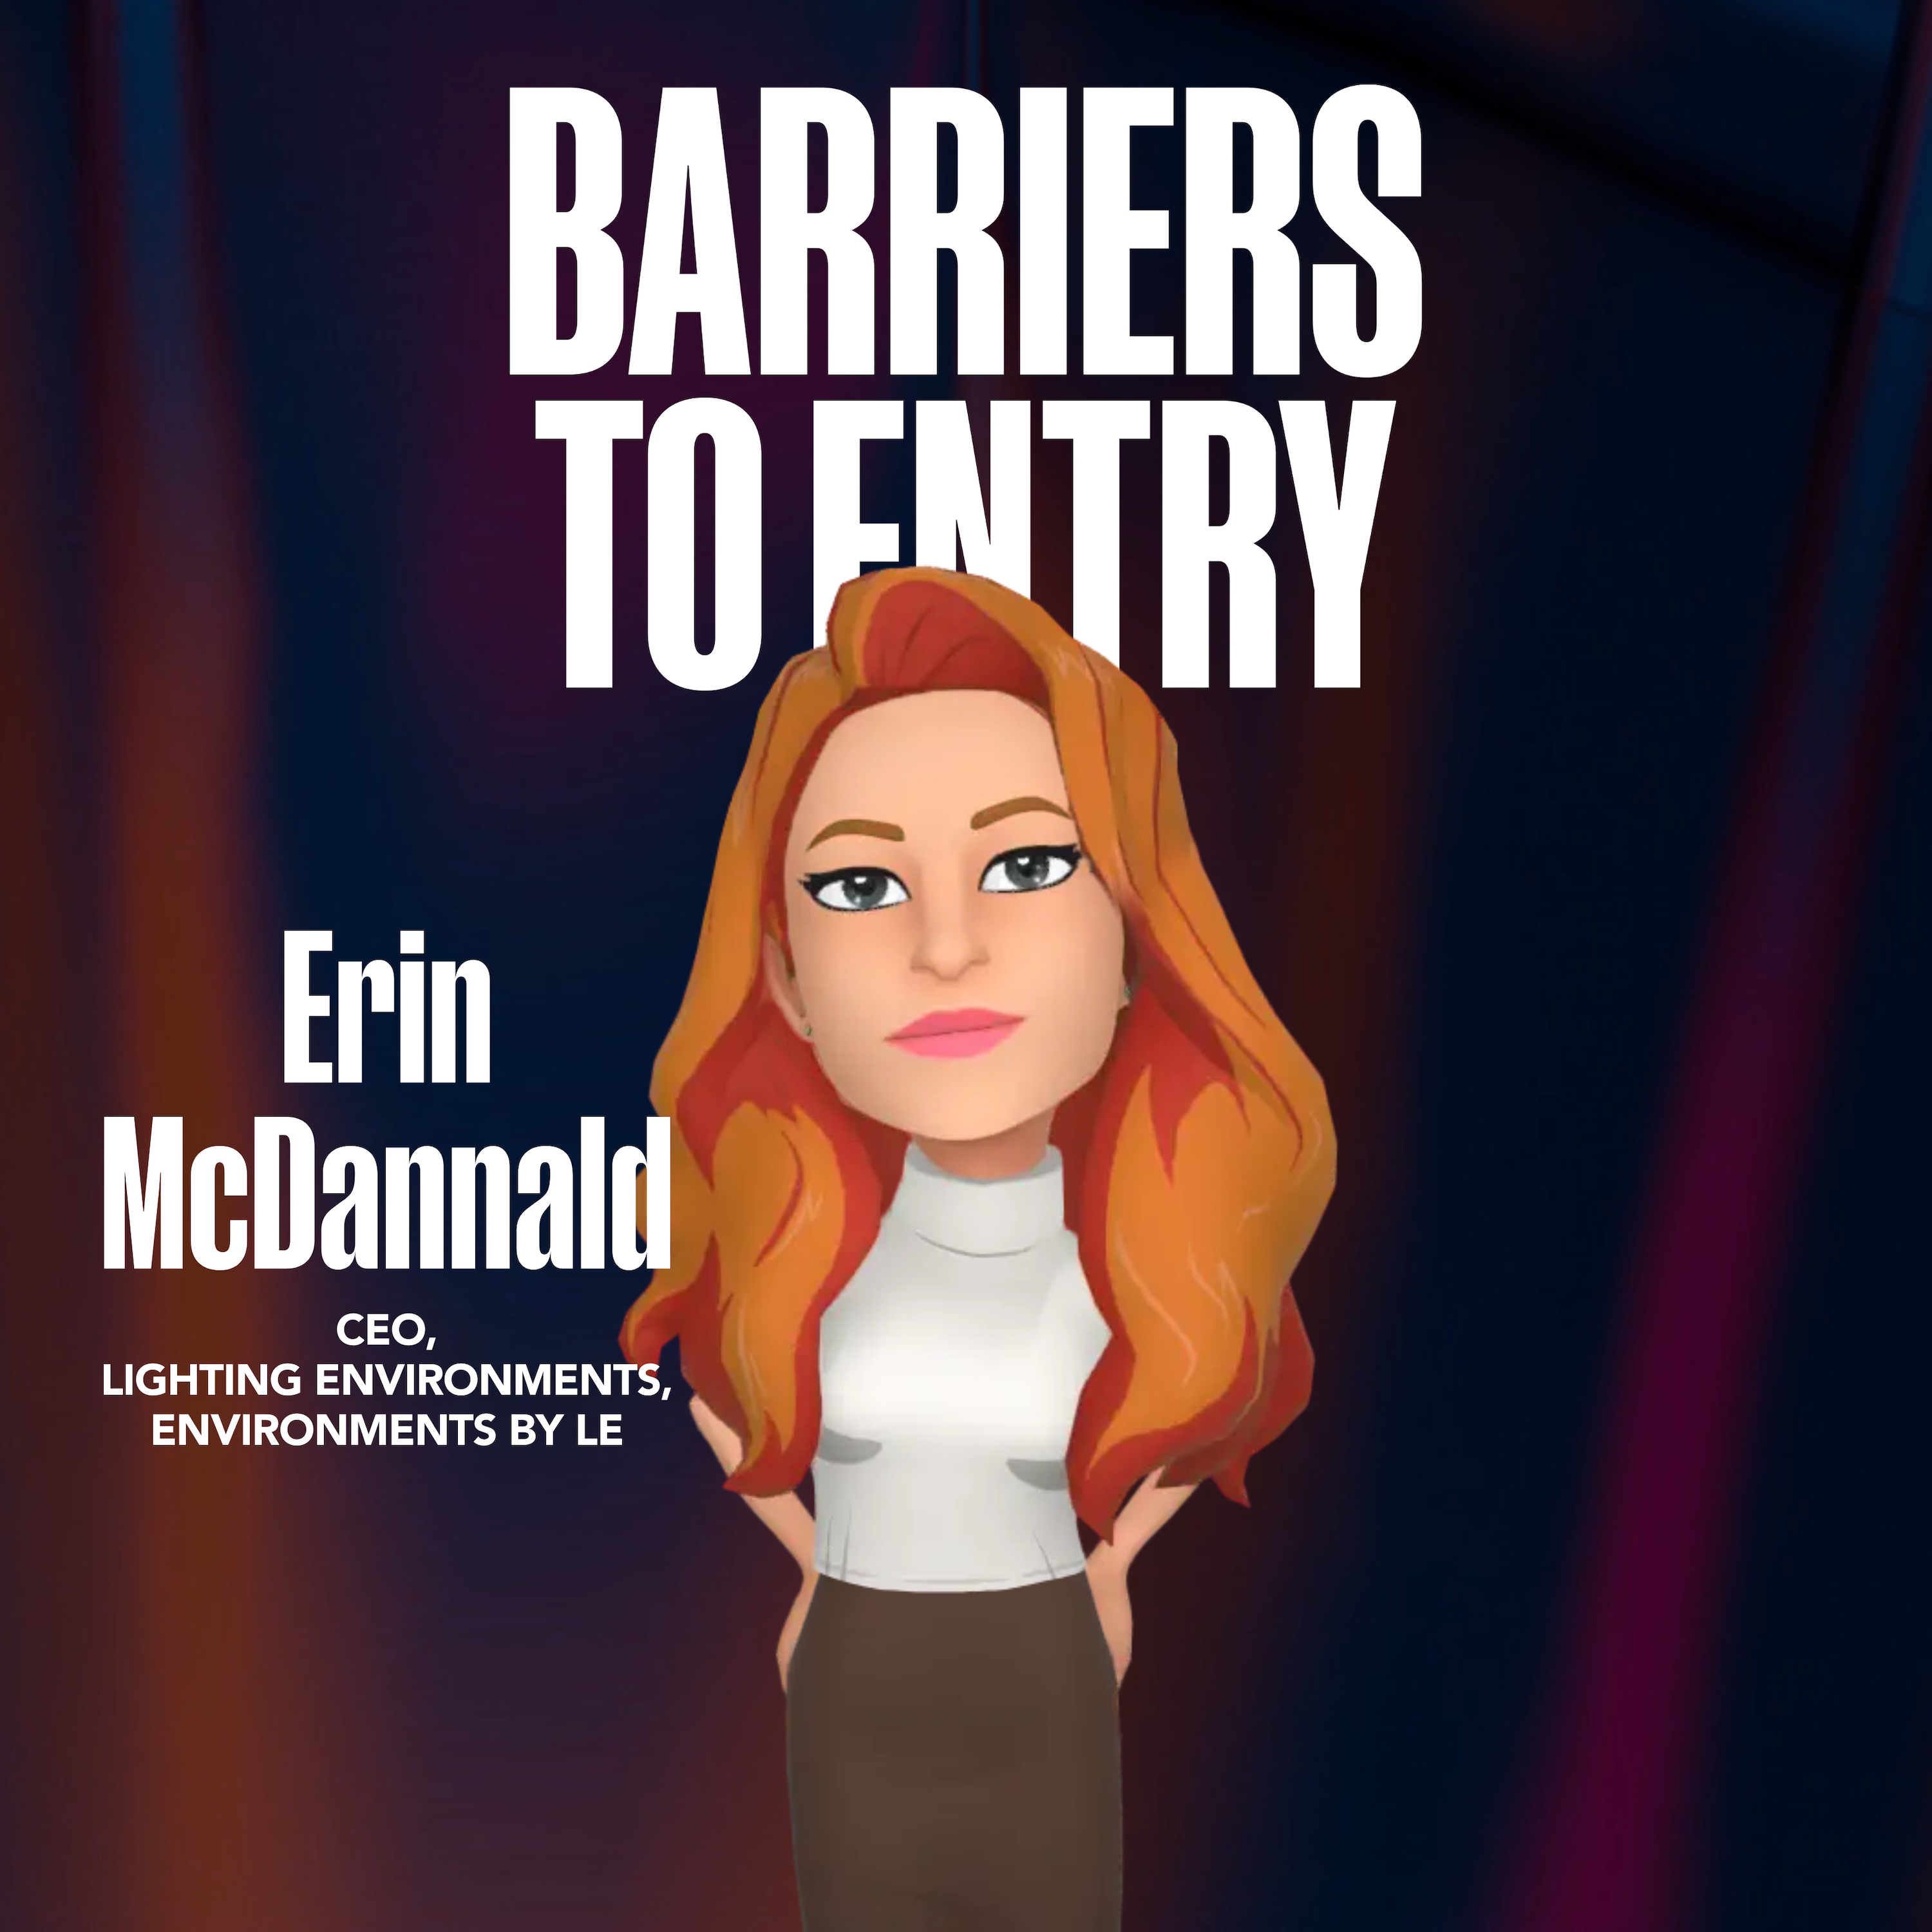 Erin McDannald on the cover of the Barriers to Entry podcast episode artwork cover